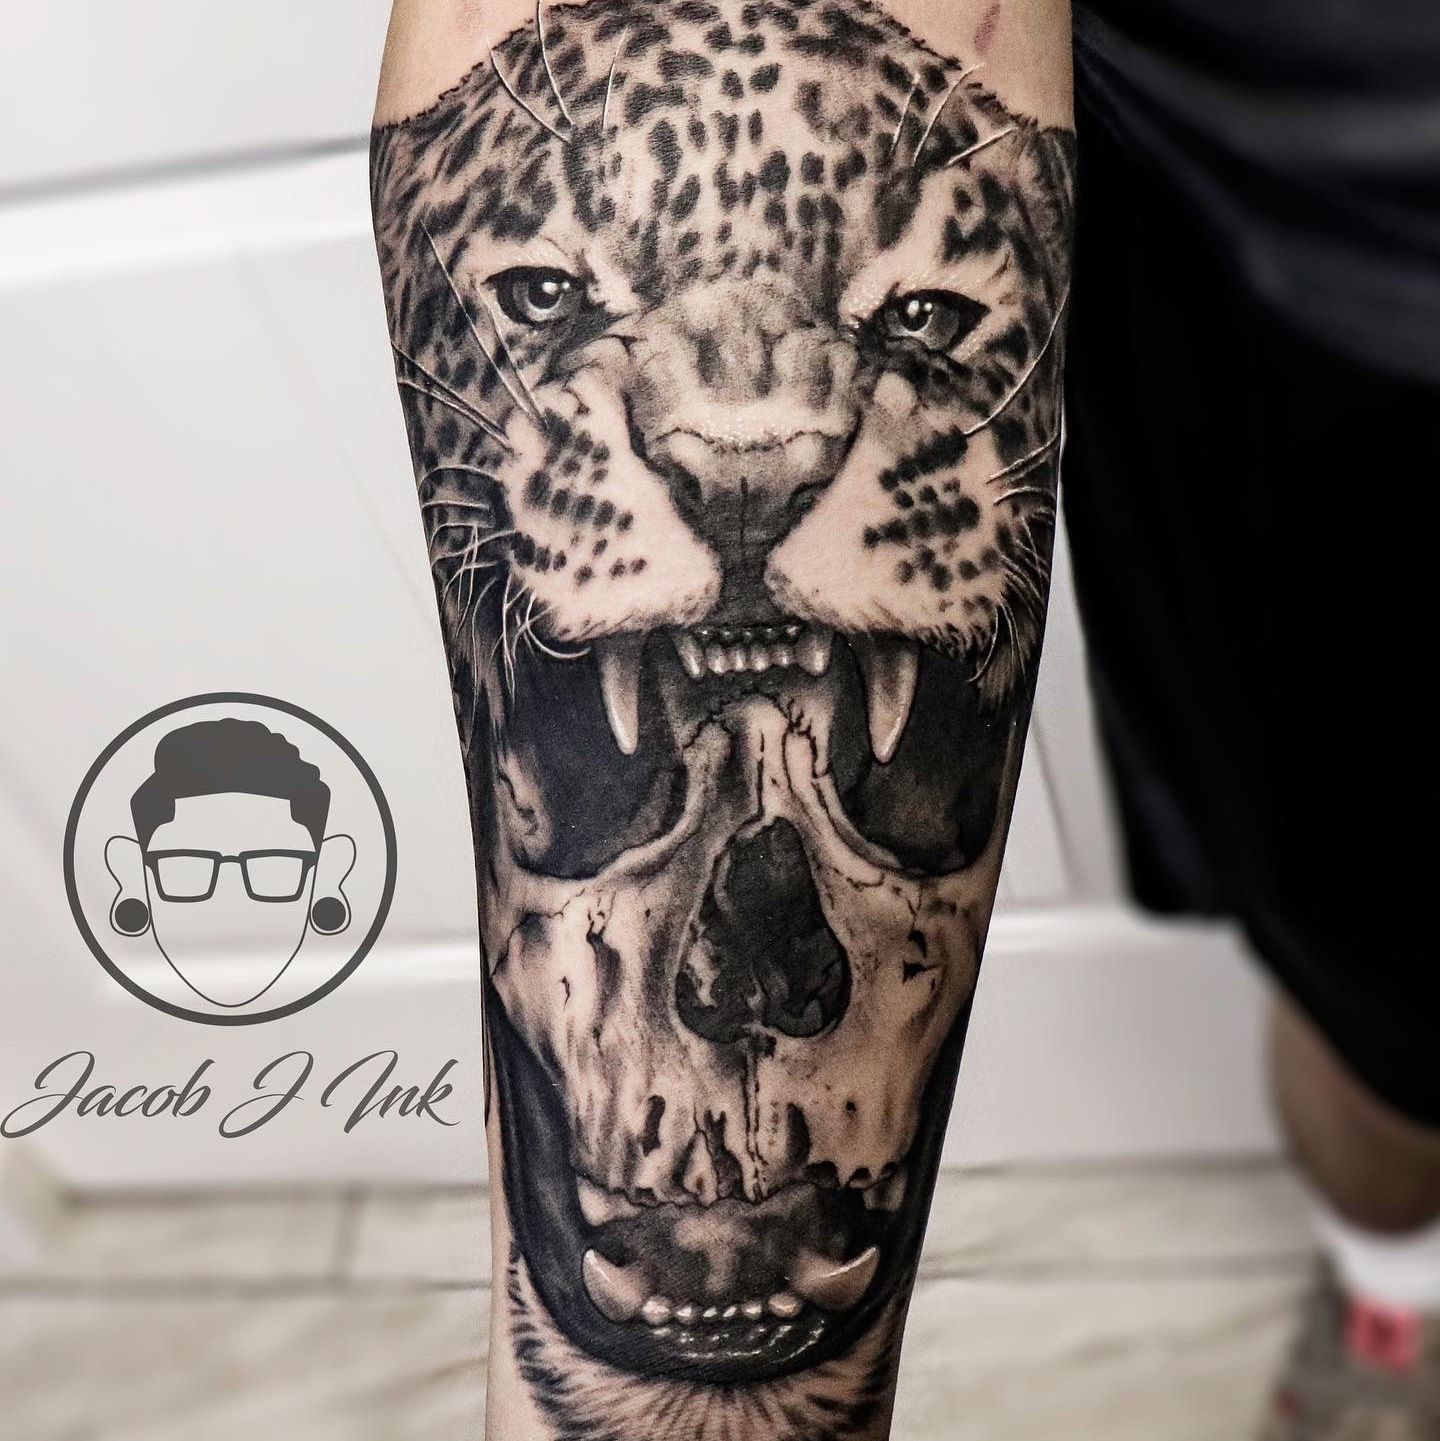 Old Crow Tattoo  Custom shadow jaguar and skull by our very own Holi  Barahati Done at Old Crow Tattoo Oakland oldcrowtattoo oldcrowtattoo  oldcrowtattoo oldcrowtattoo holibarahati holibarahati holibarahati  holibarahati outofdanger 